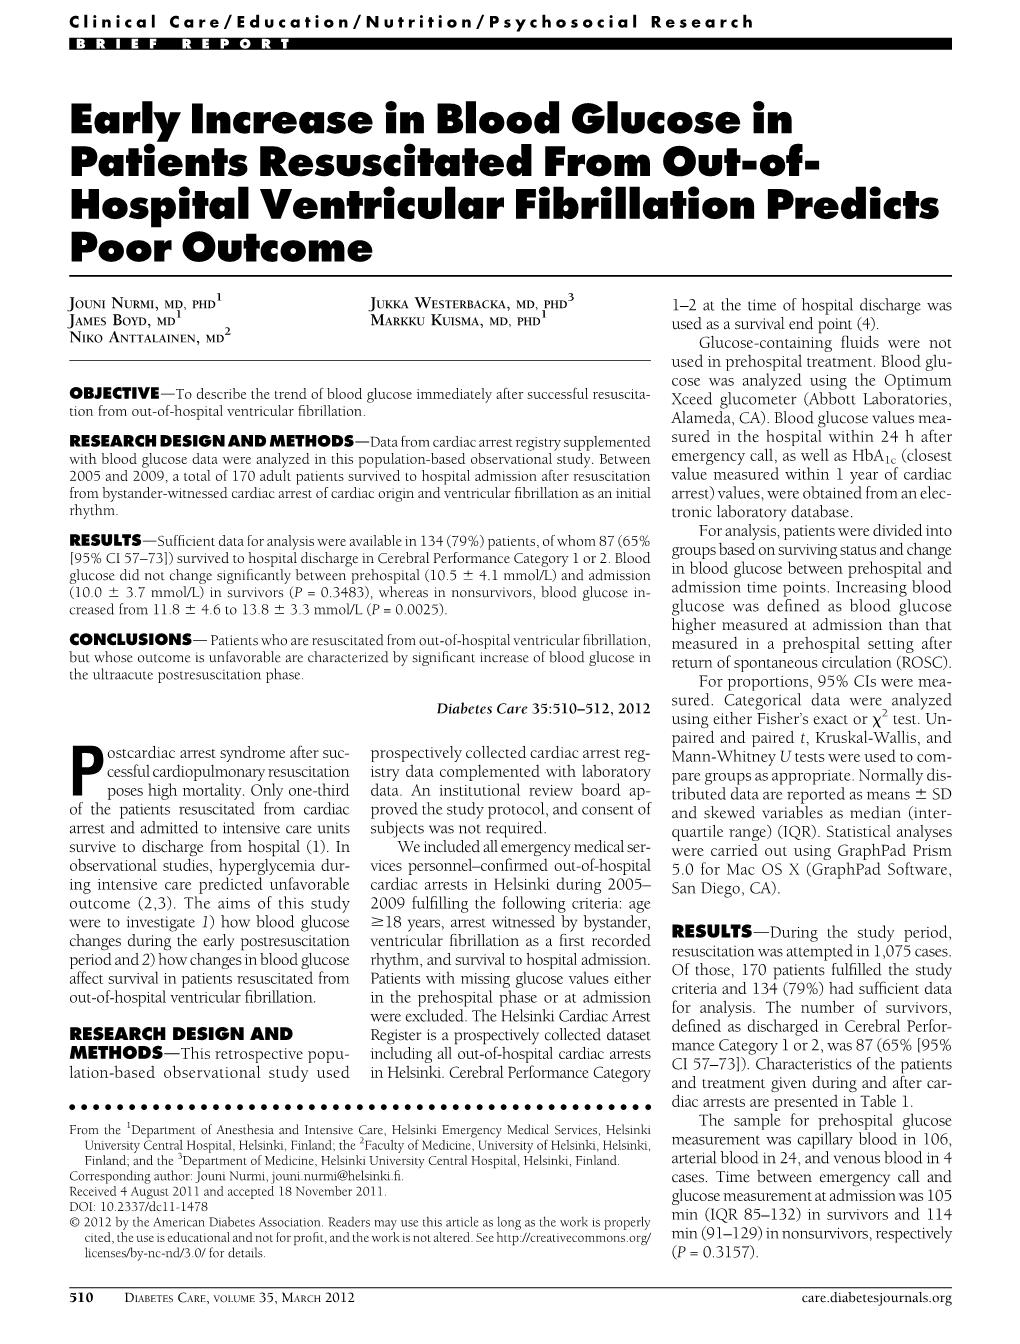 Early Increase in Blood Glucose in Patients Resuscitated from Out-Of- Hospital Ventricular Fibrillation Predicts Poor Outcome